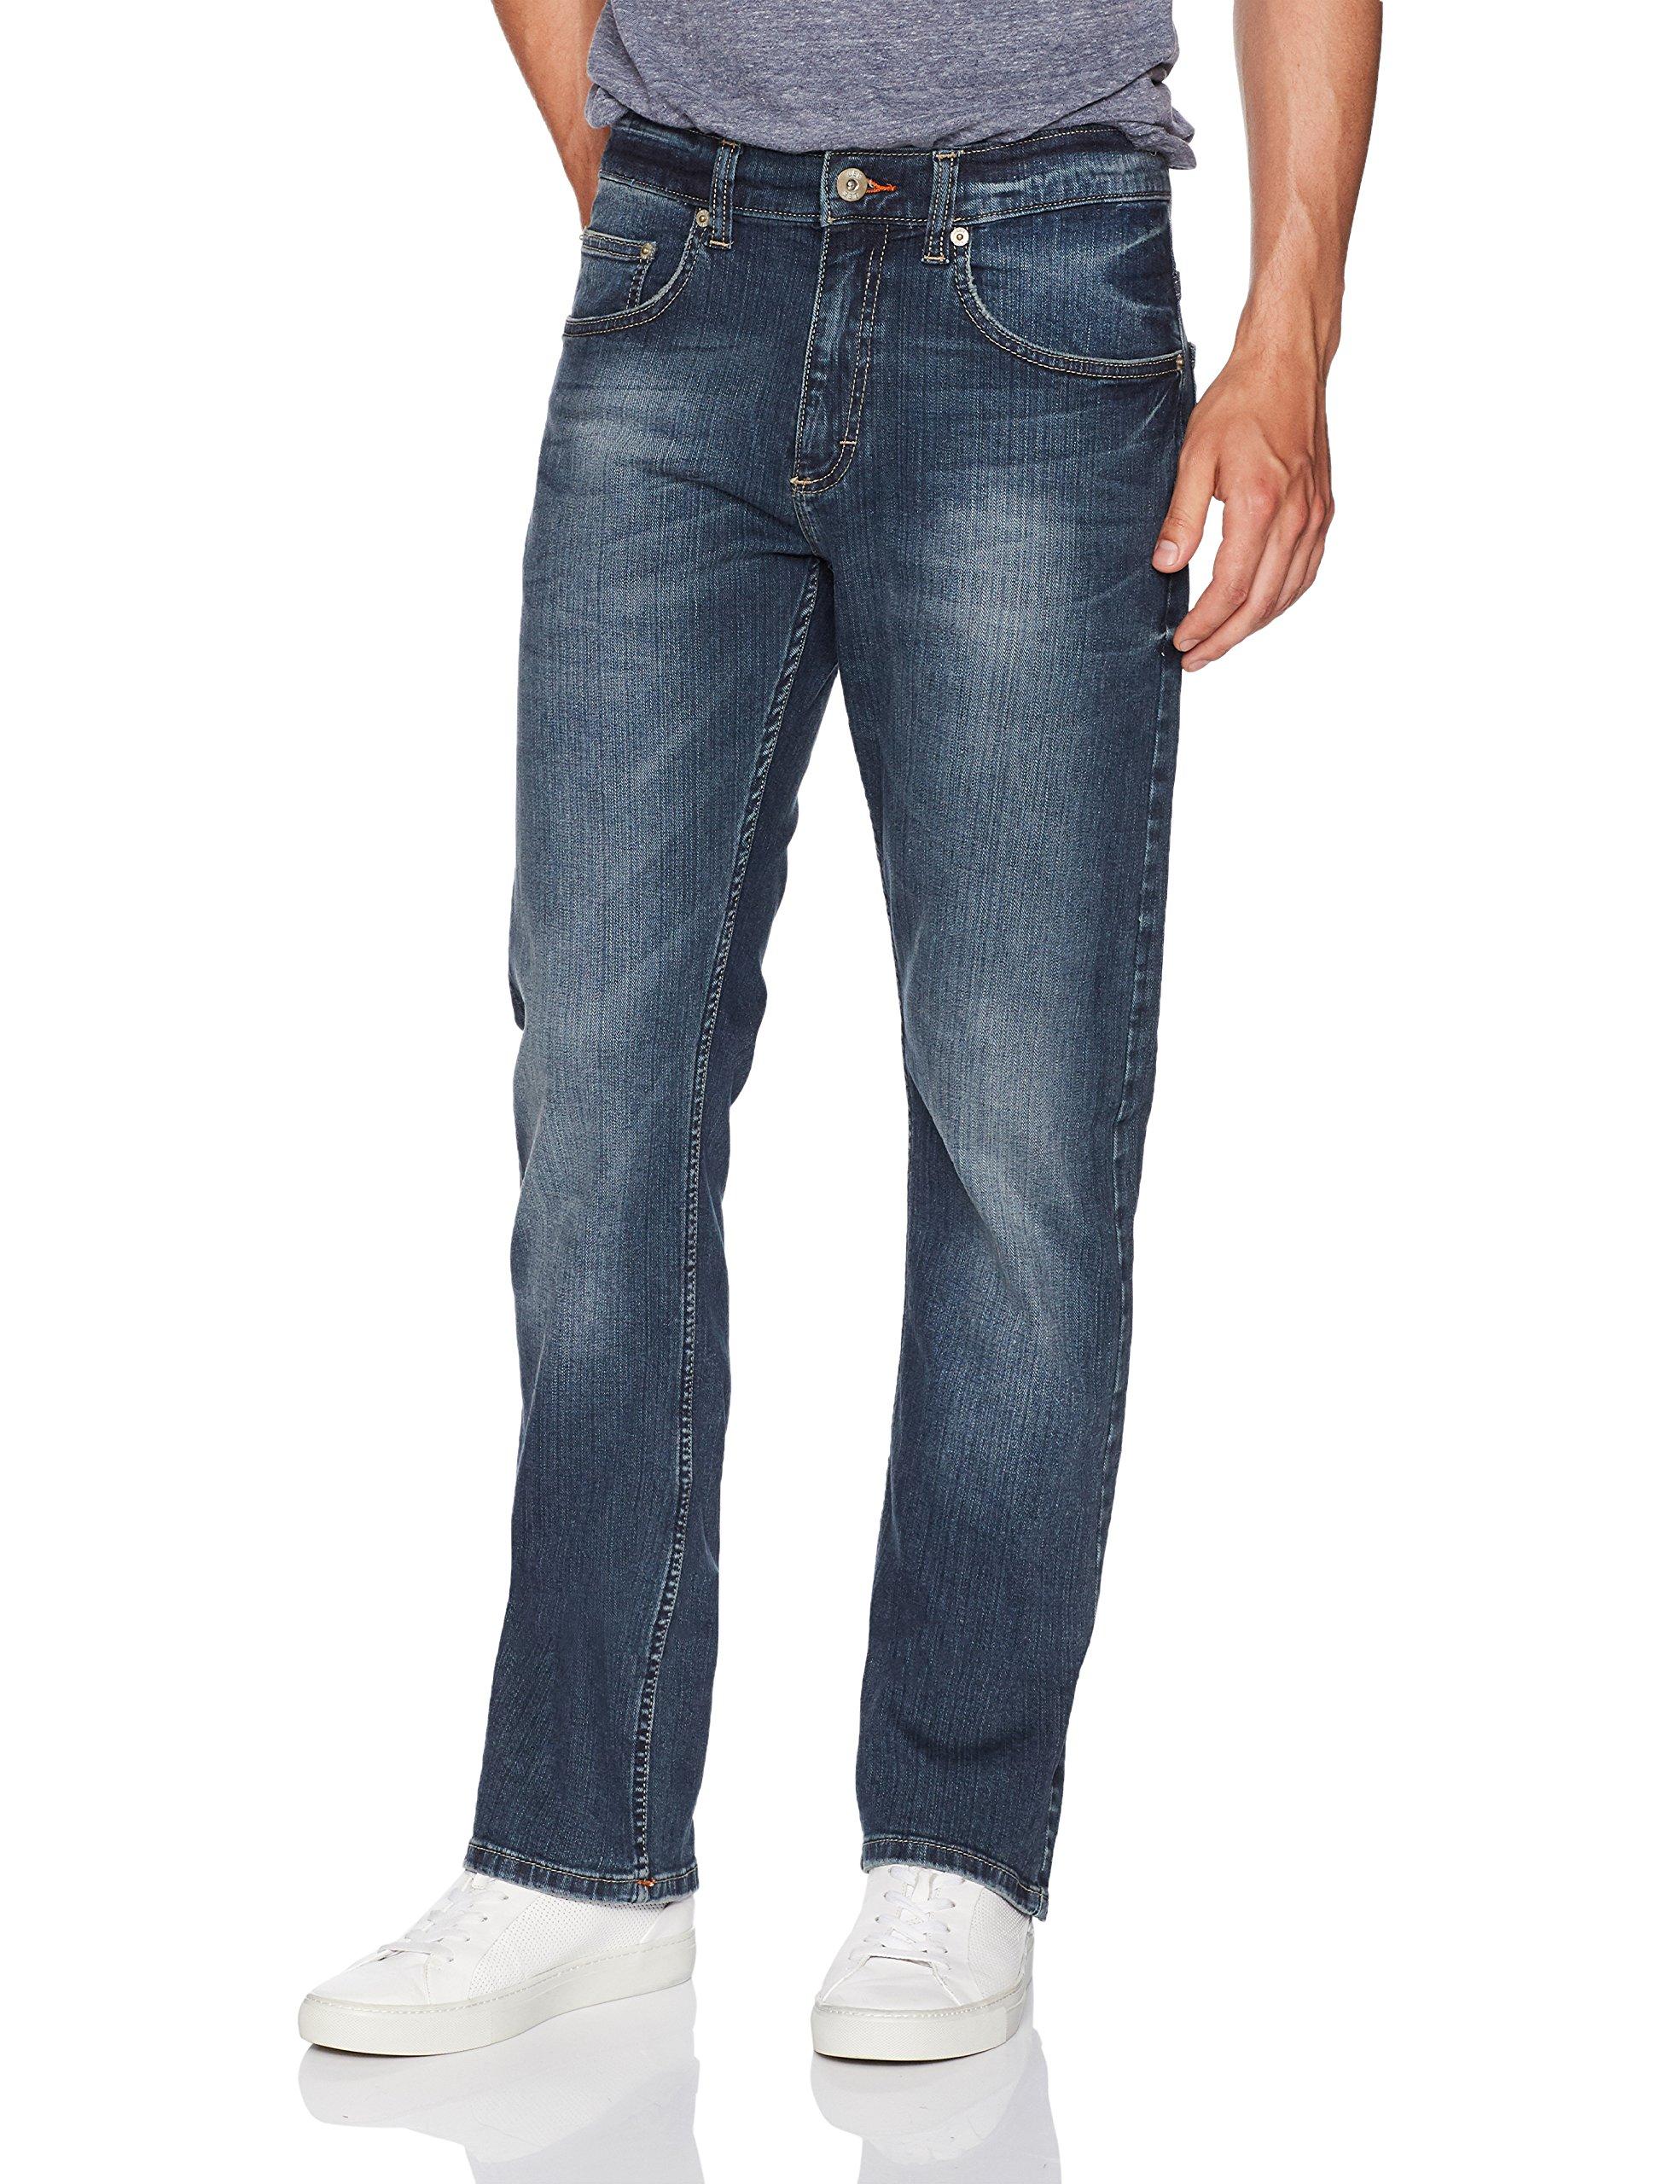 Lee Jeans Denim Modern Series Relaxed-fit Bootcut Jean in Blue for Men ...